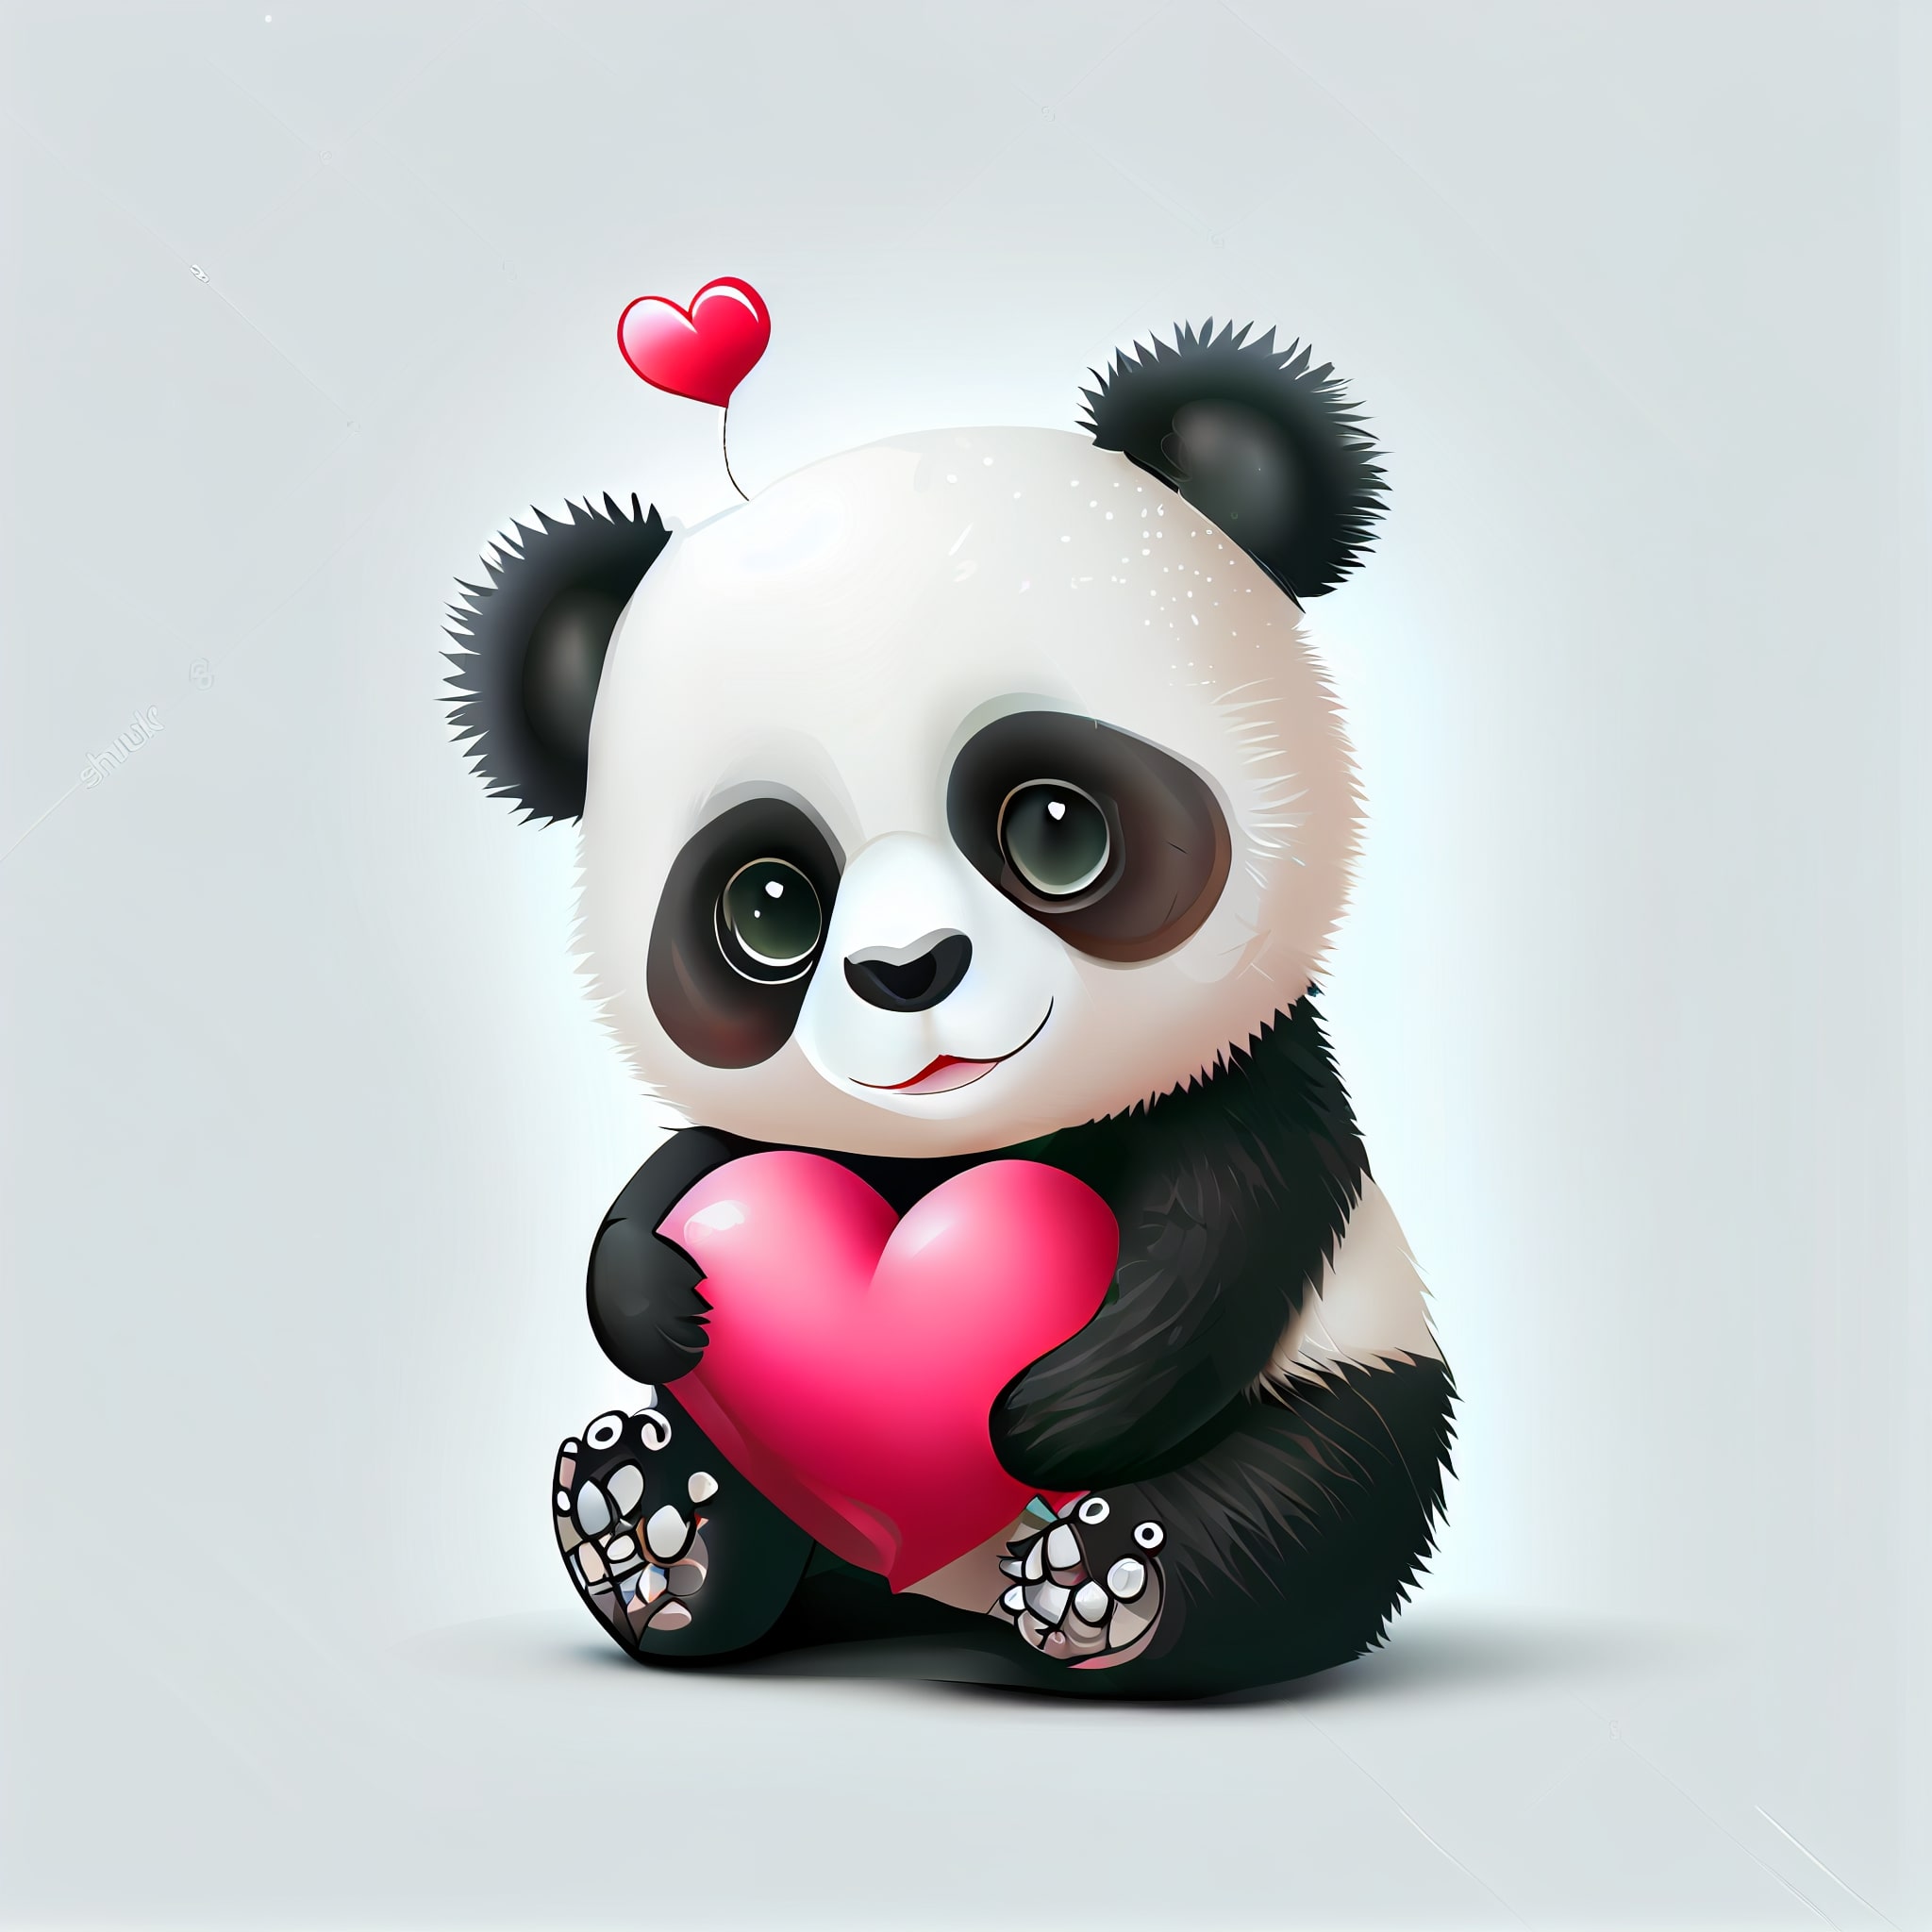 Panda bear holding a heart on a white background.